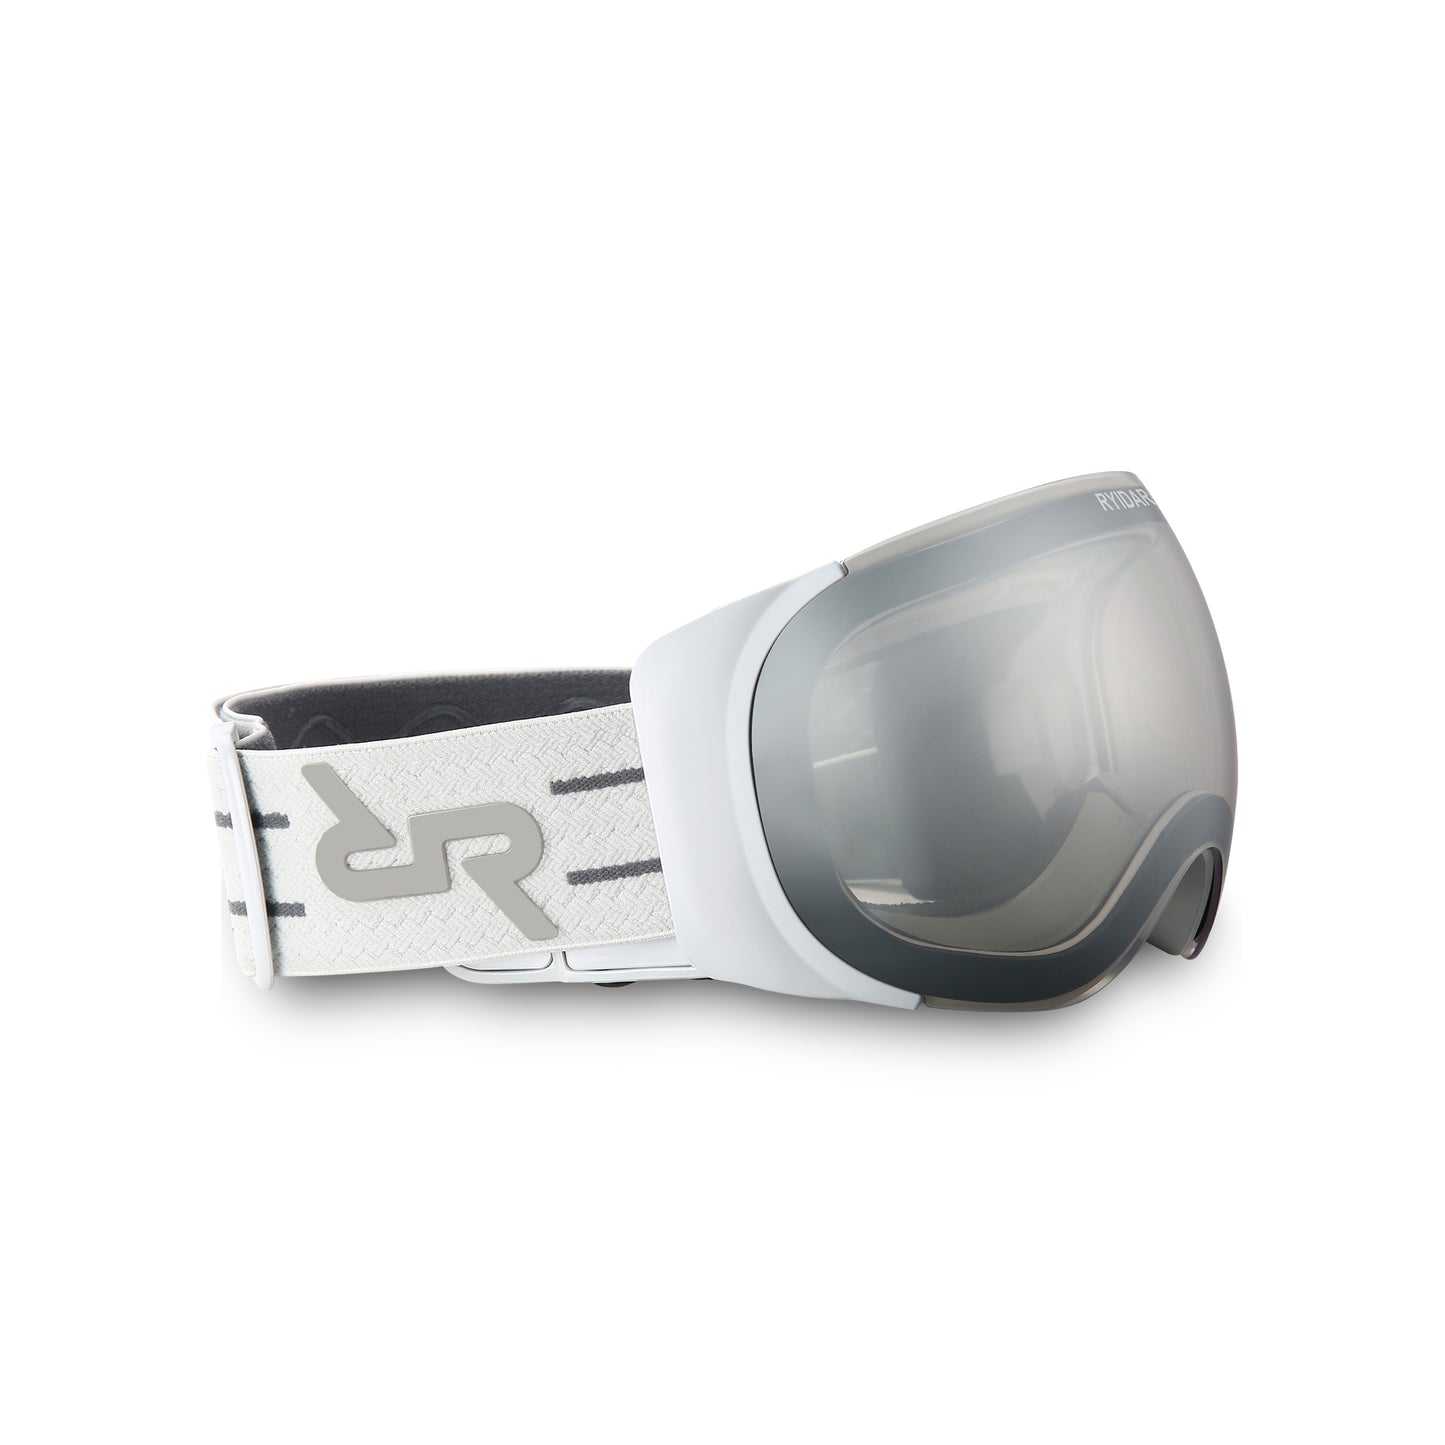 LinkLens Pro 2 Audio Snow Goggles Standard Fit + Night Vision Lens